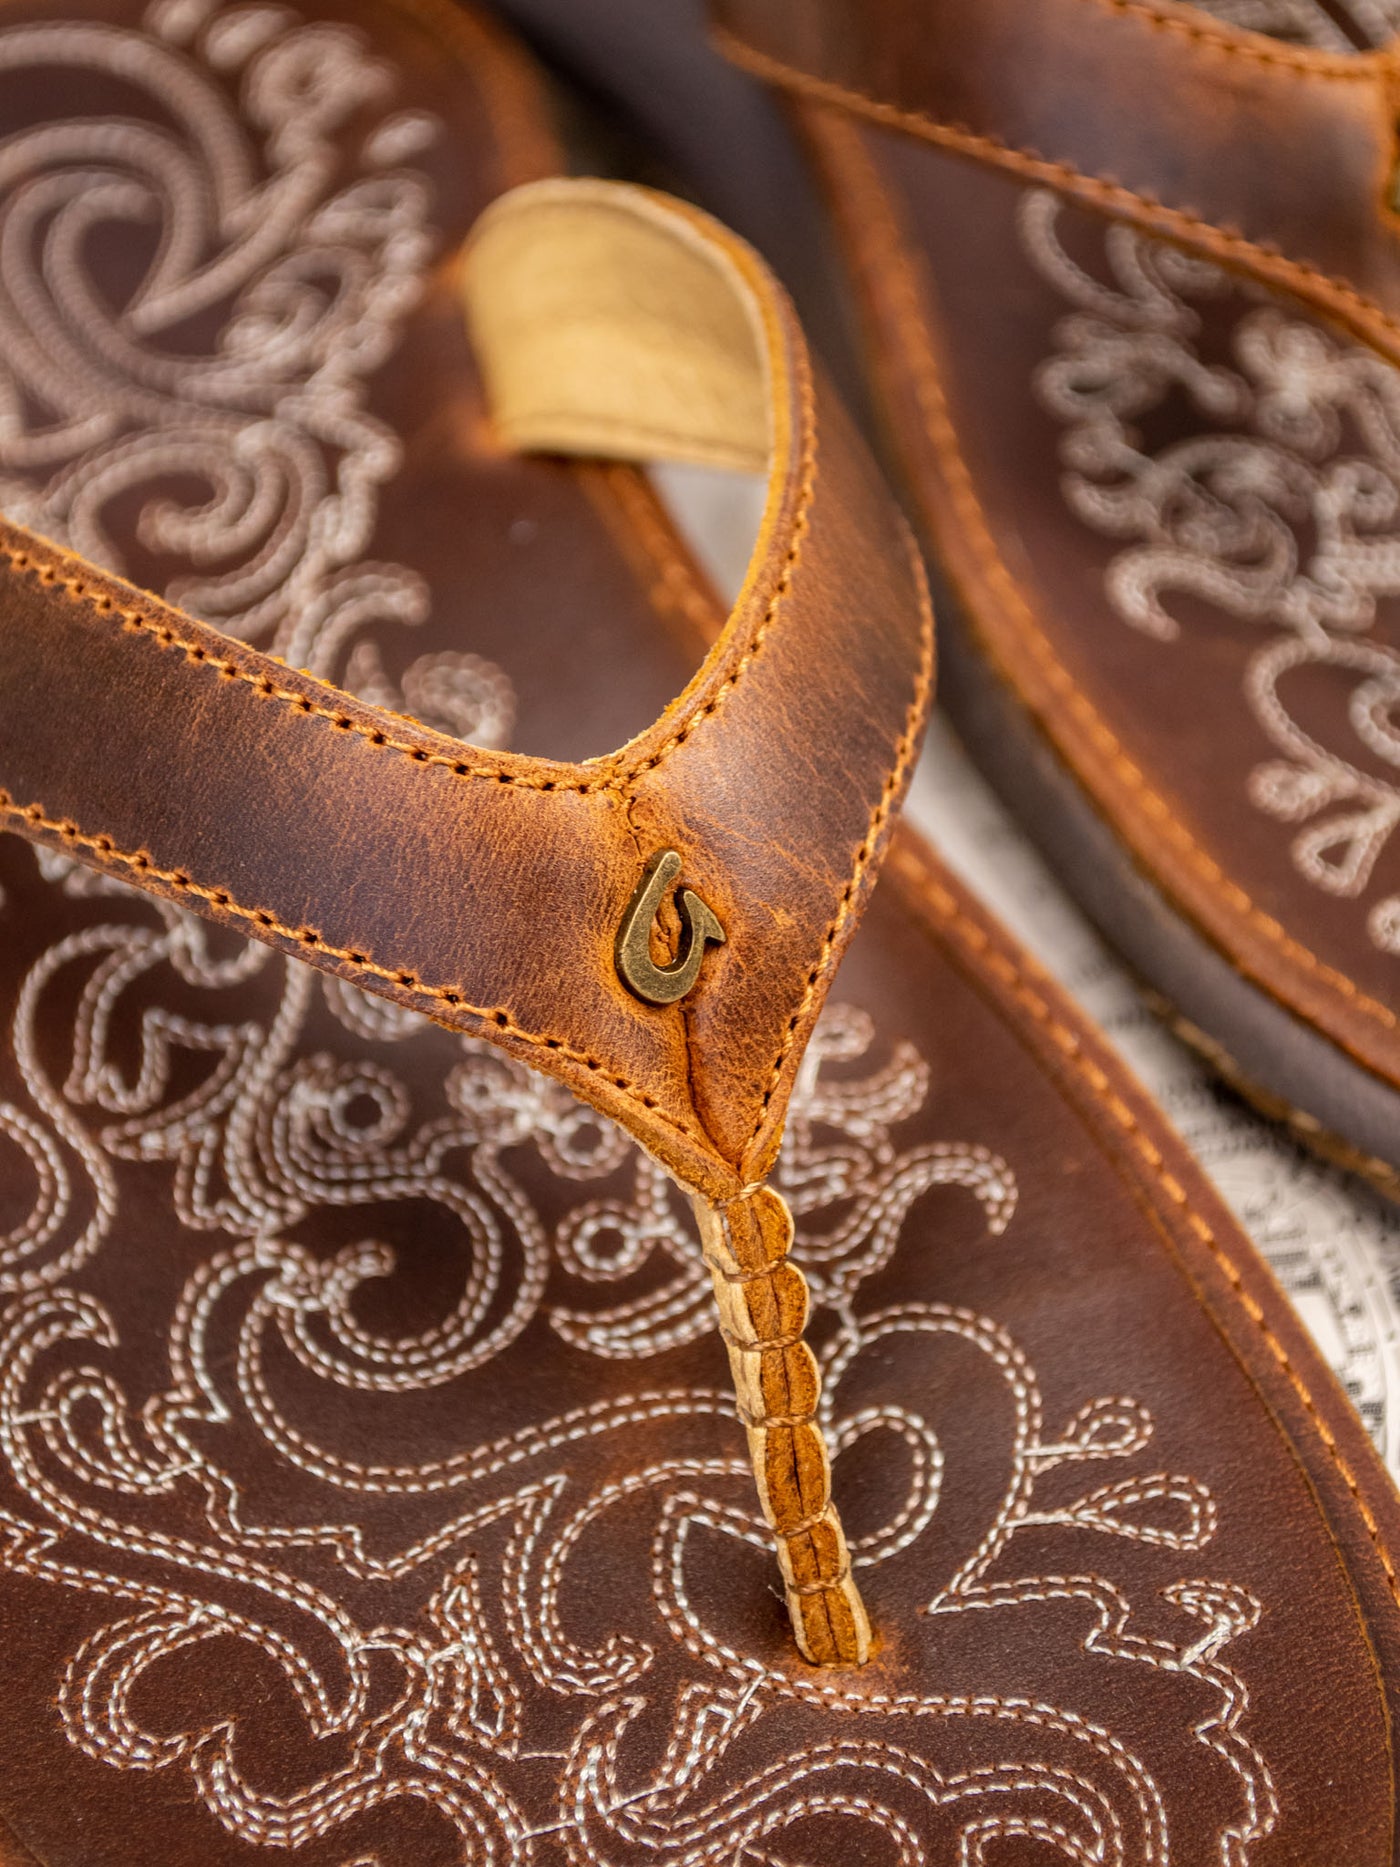 A brown leather sandal with stitching details and between the toe strap.